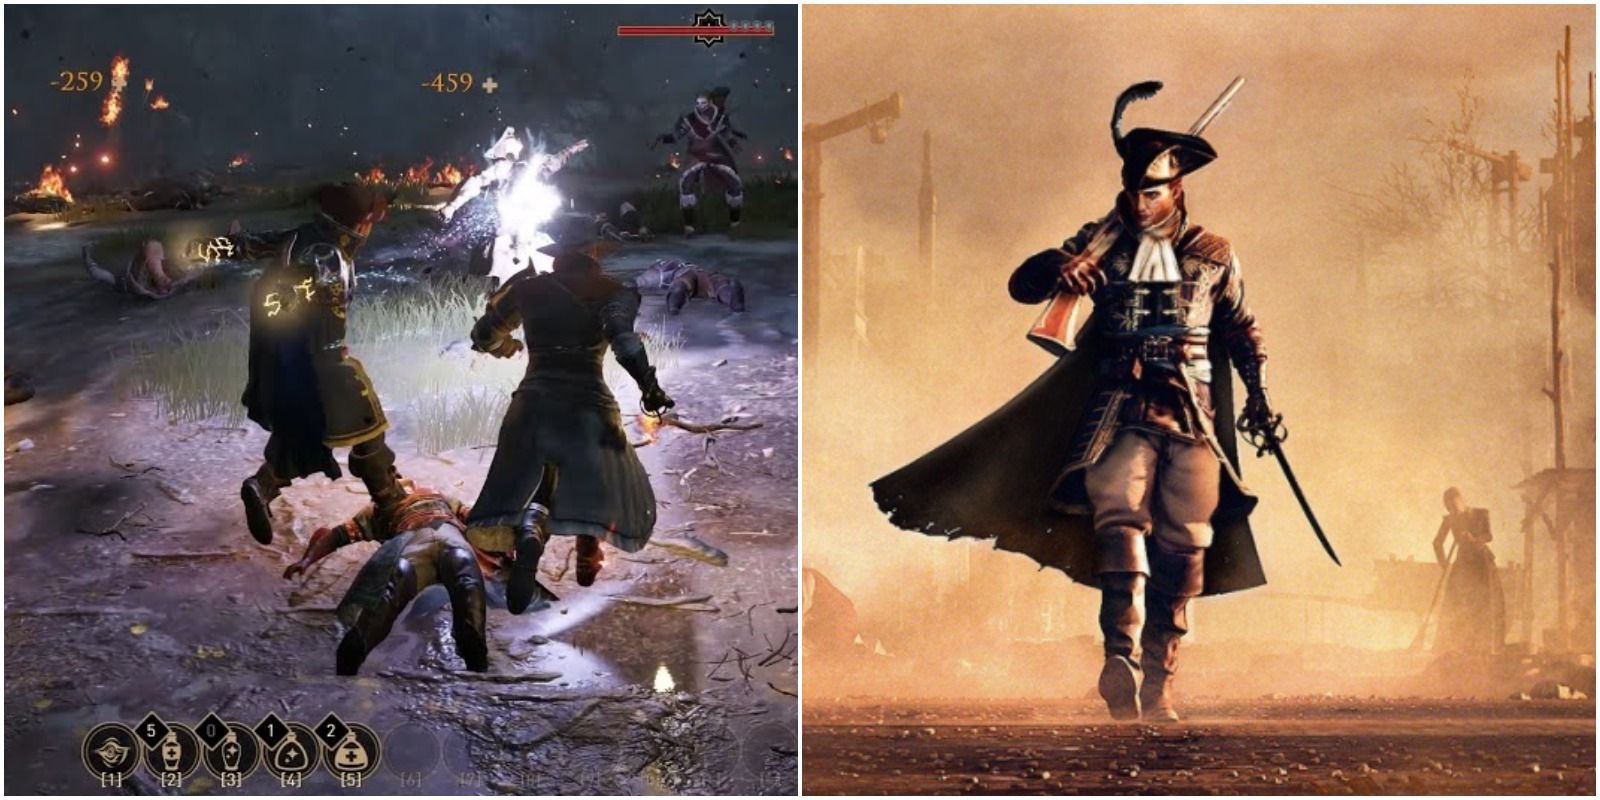 player using magic in combat and game art.